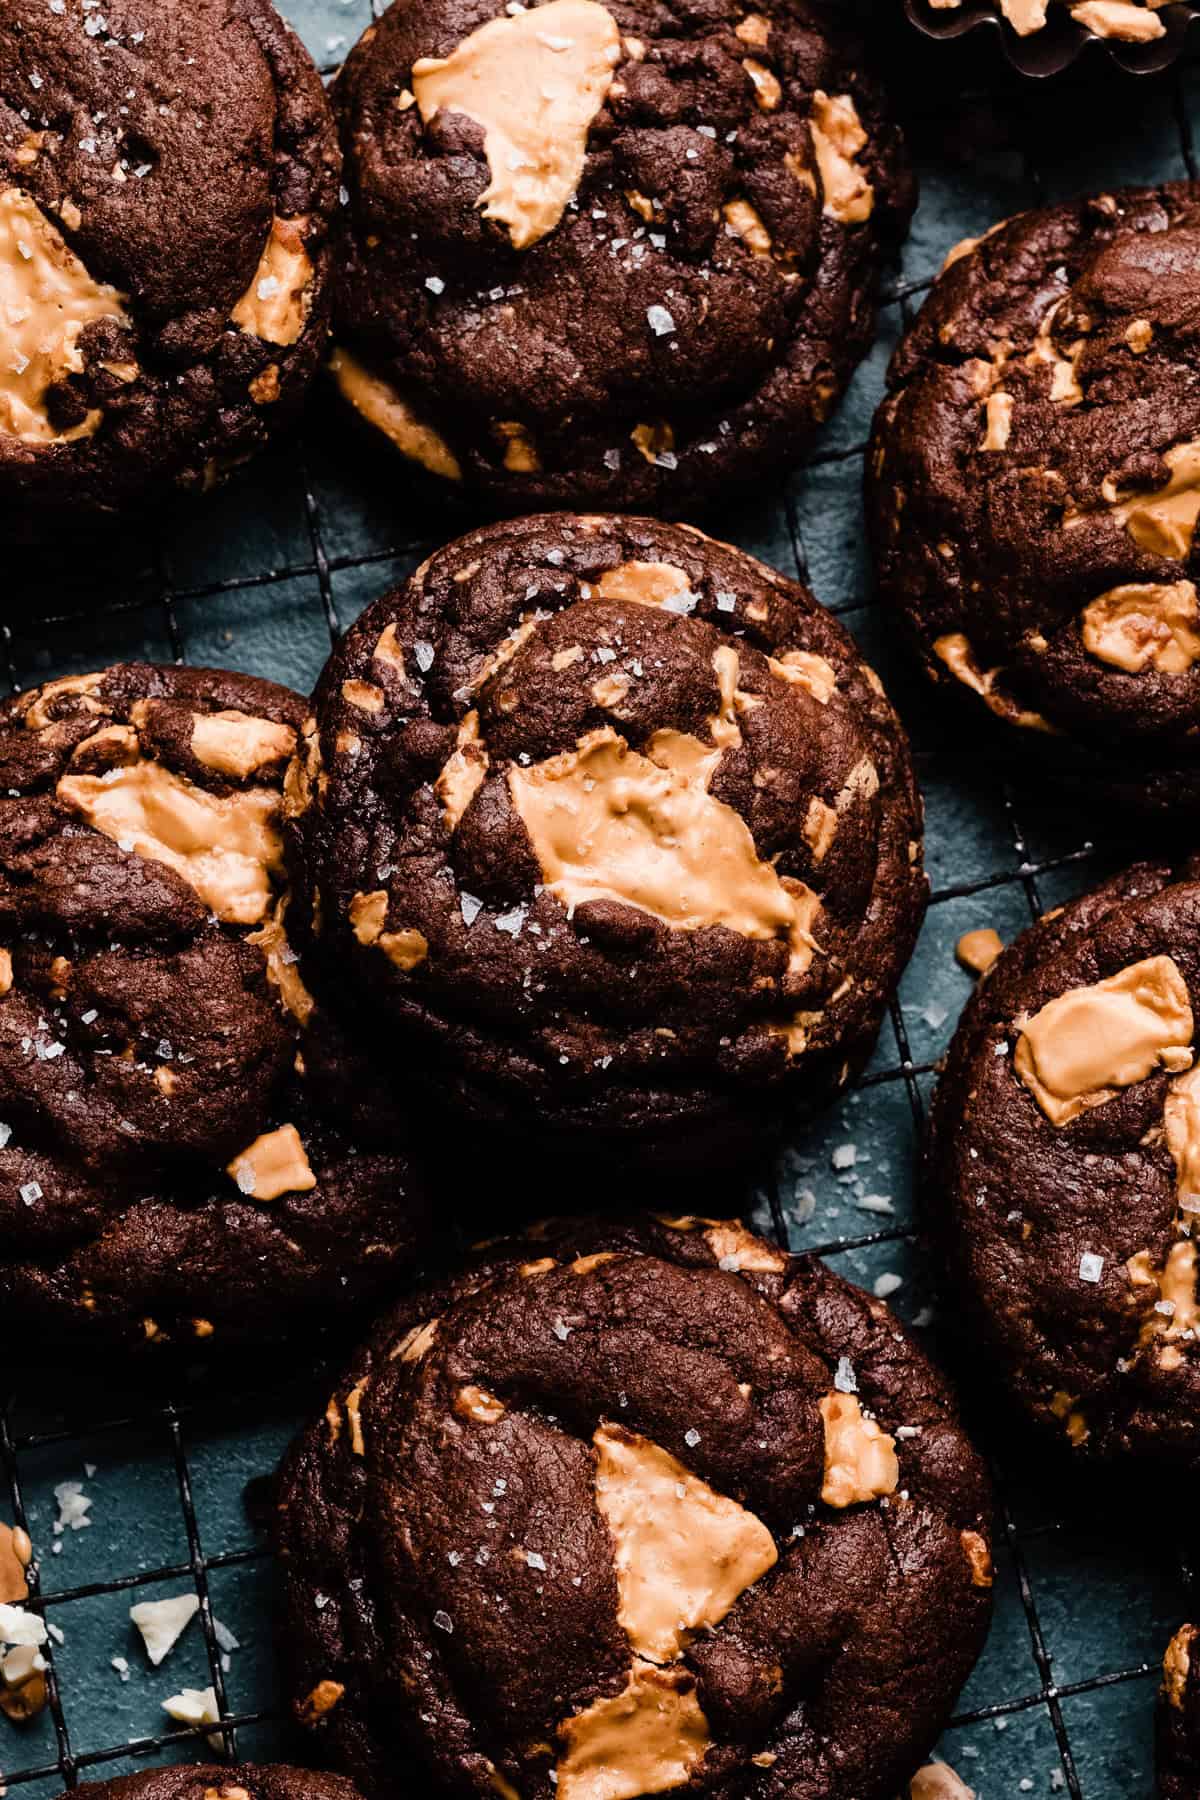 Chocolate cookies studded with caramelized white chocolate chunks.